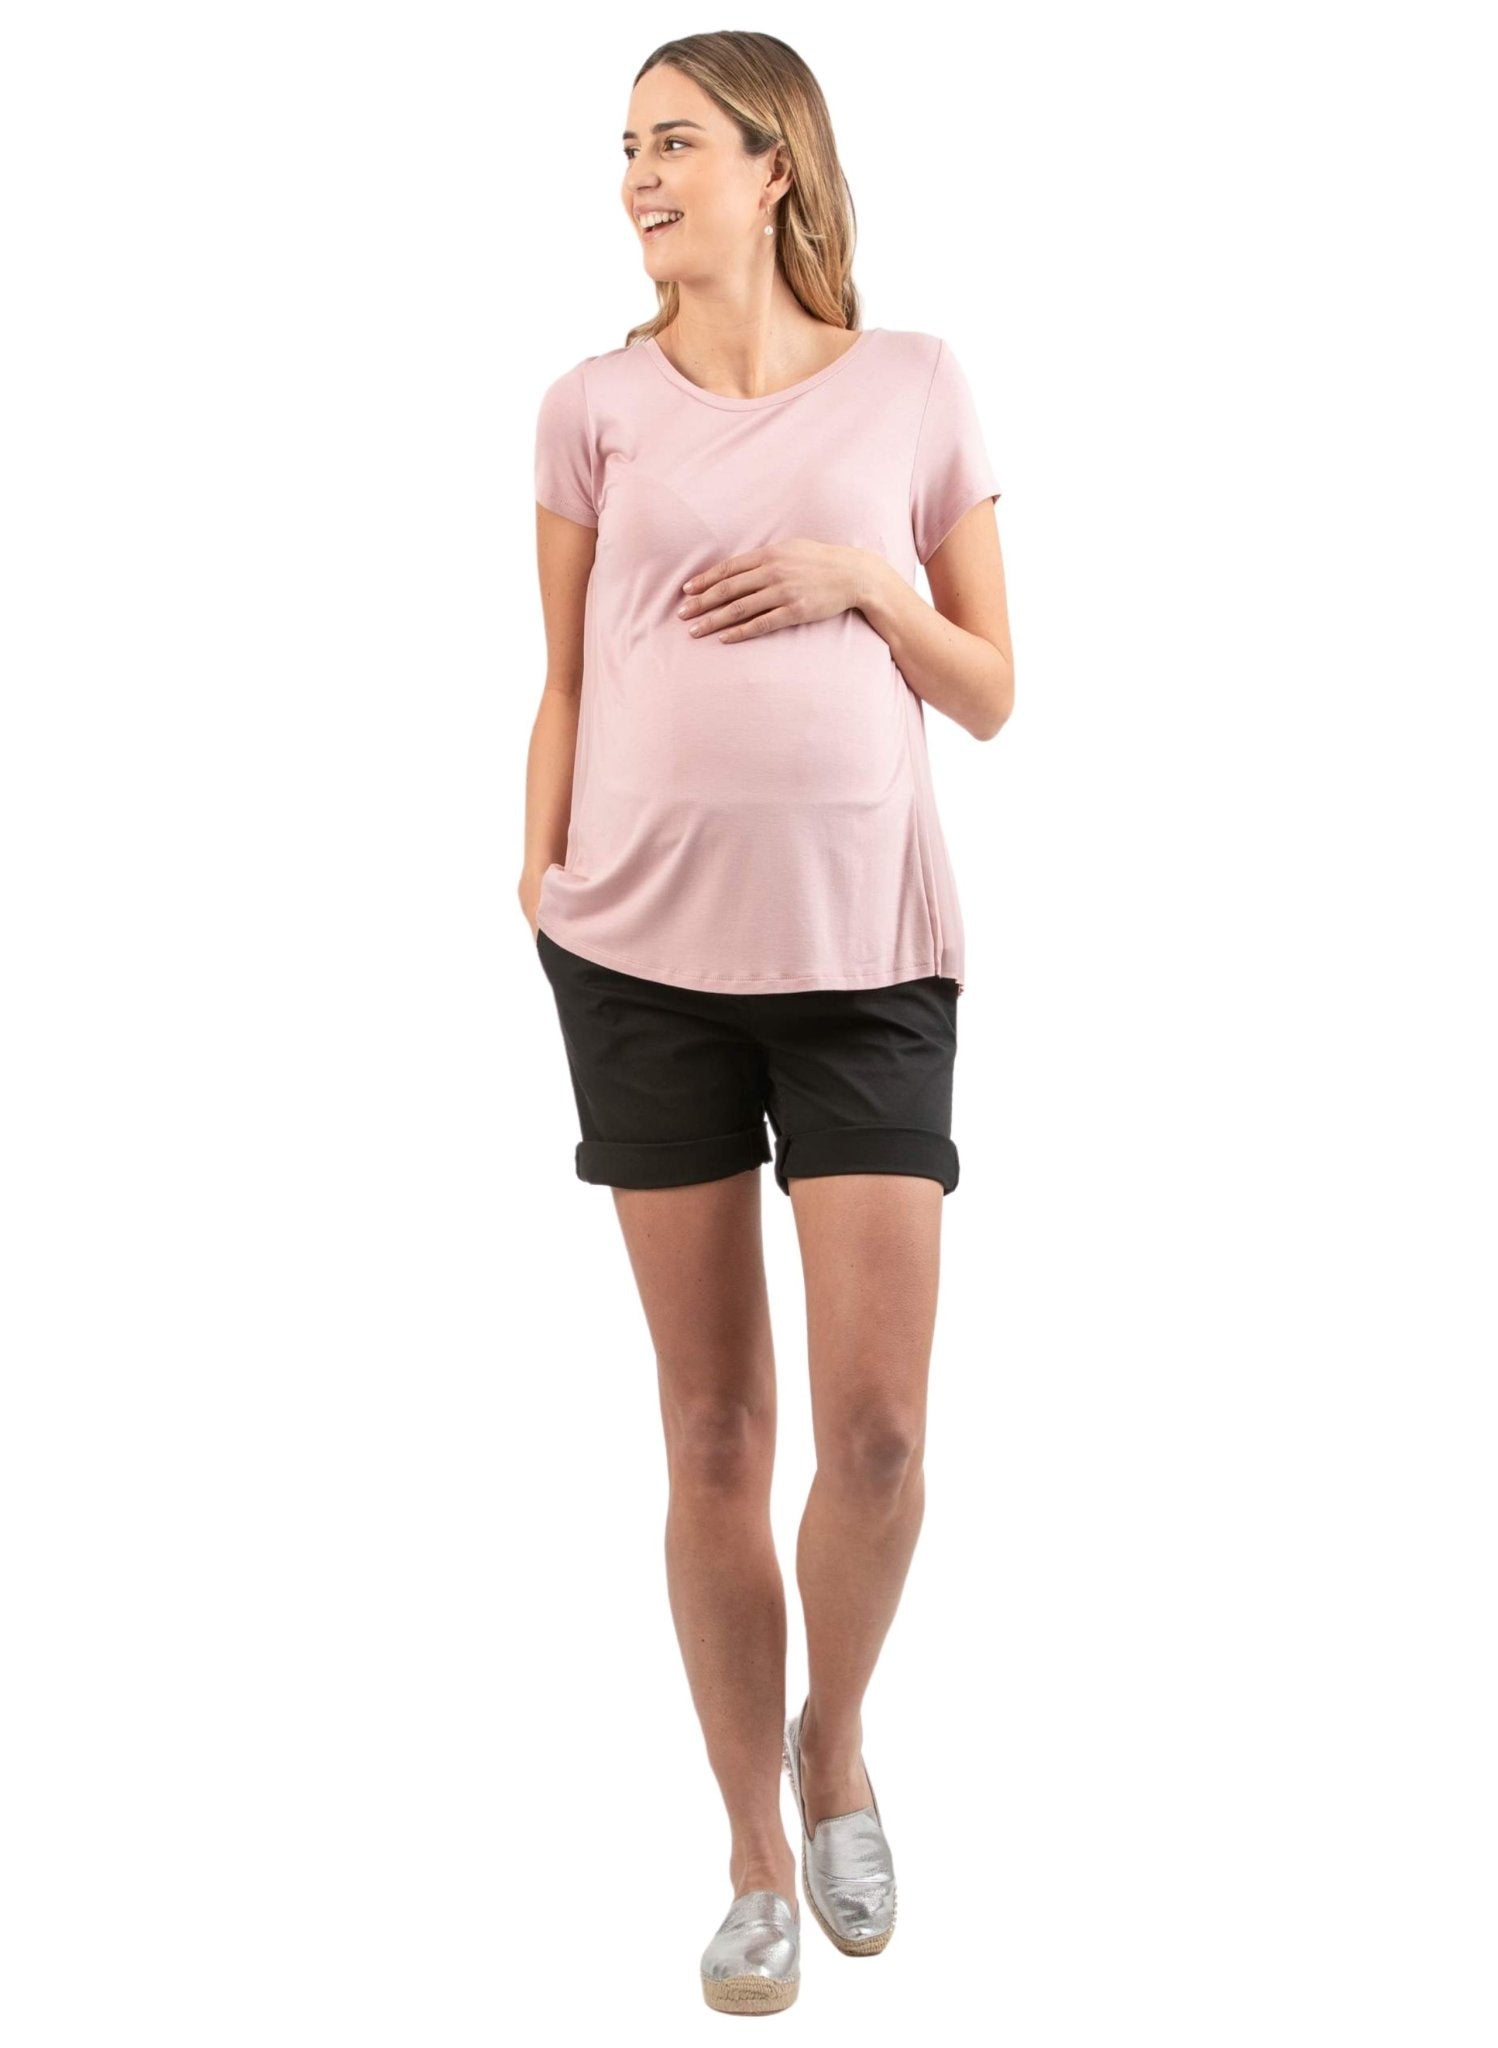 Maternity Shorts in Lightweight Cotton - Black - Mums and Bumps